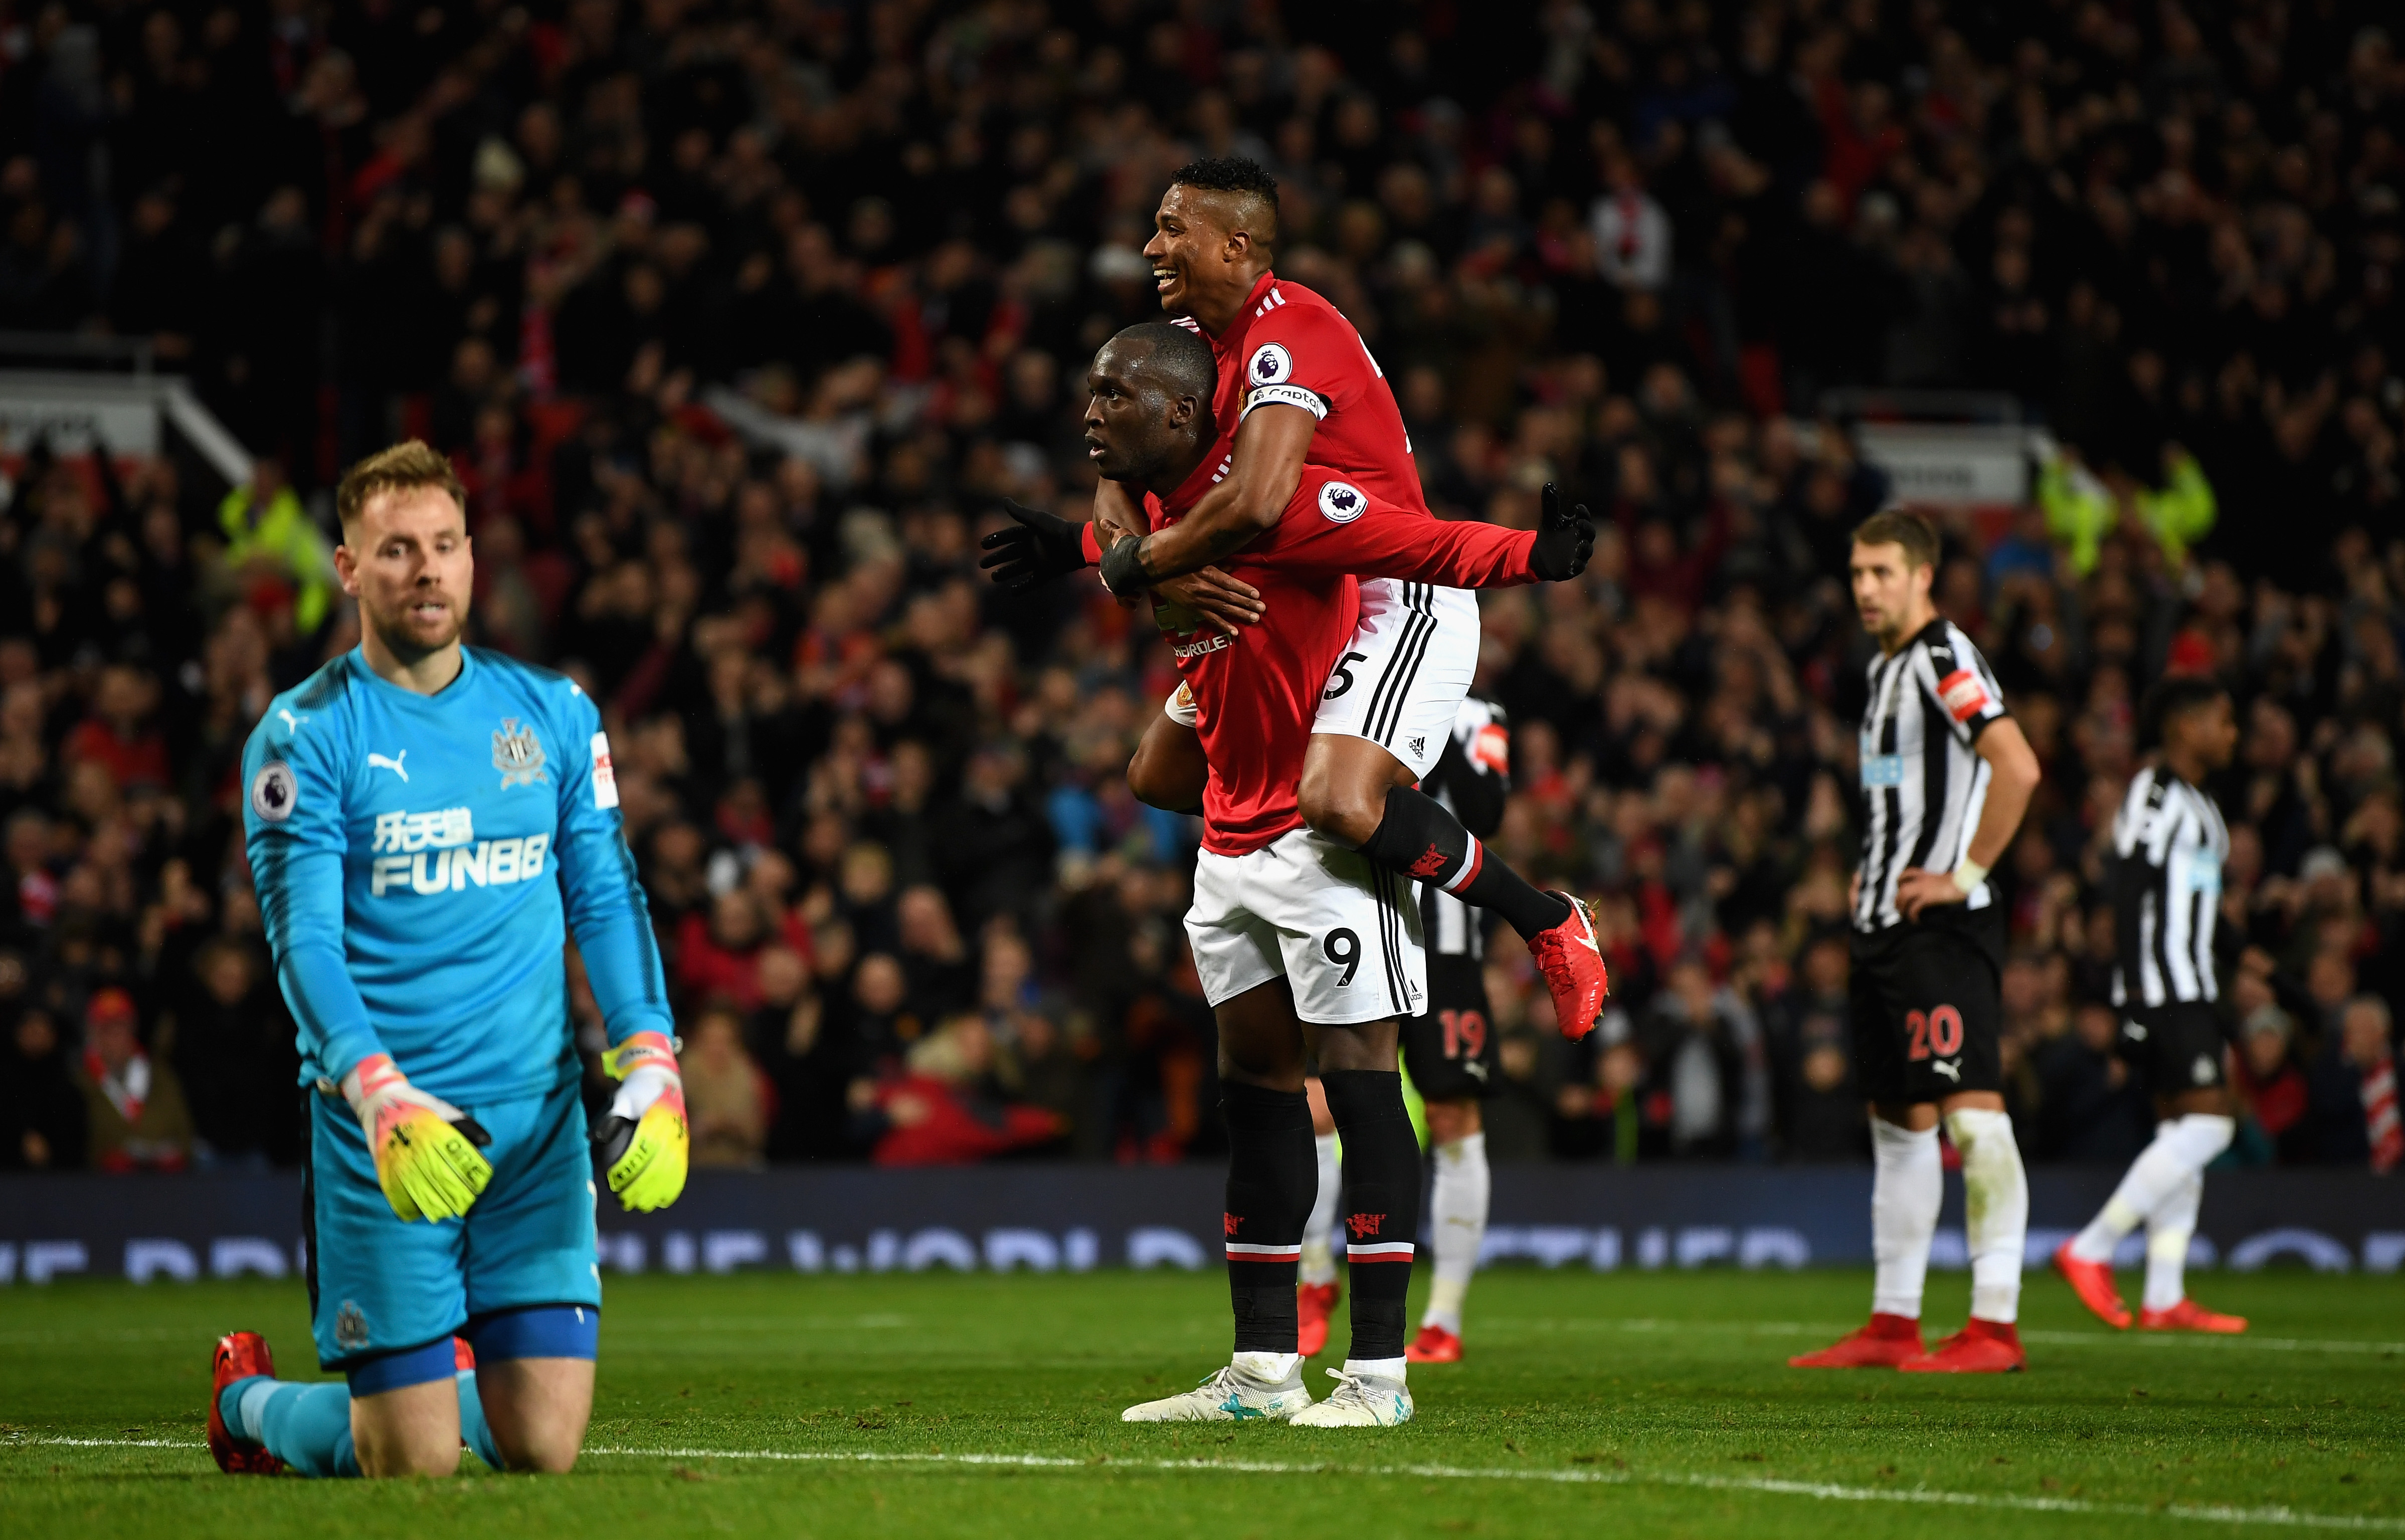 MANCHESTER, ENGLAND - NOVEMBER 18:  Romelu Lukaku of Manchester United celebrates with Antonio Valencia of Manchester United after scoring his sides fourth goal during the Premier League match between Manchester United and Newcastle United at Old Trafford on November 18, 2017 in Manchester, England.  (Photo by Gareth Copley/Getty Images)